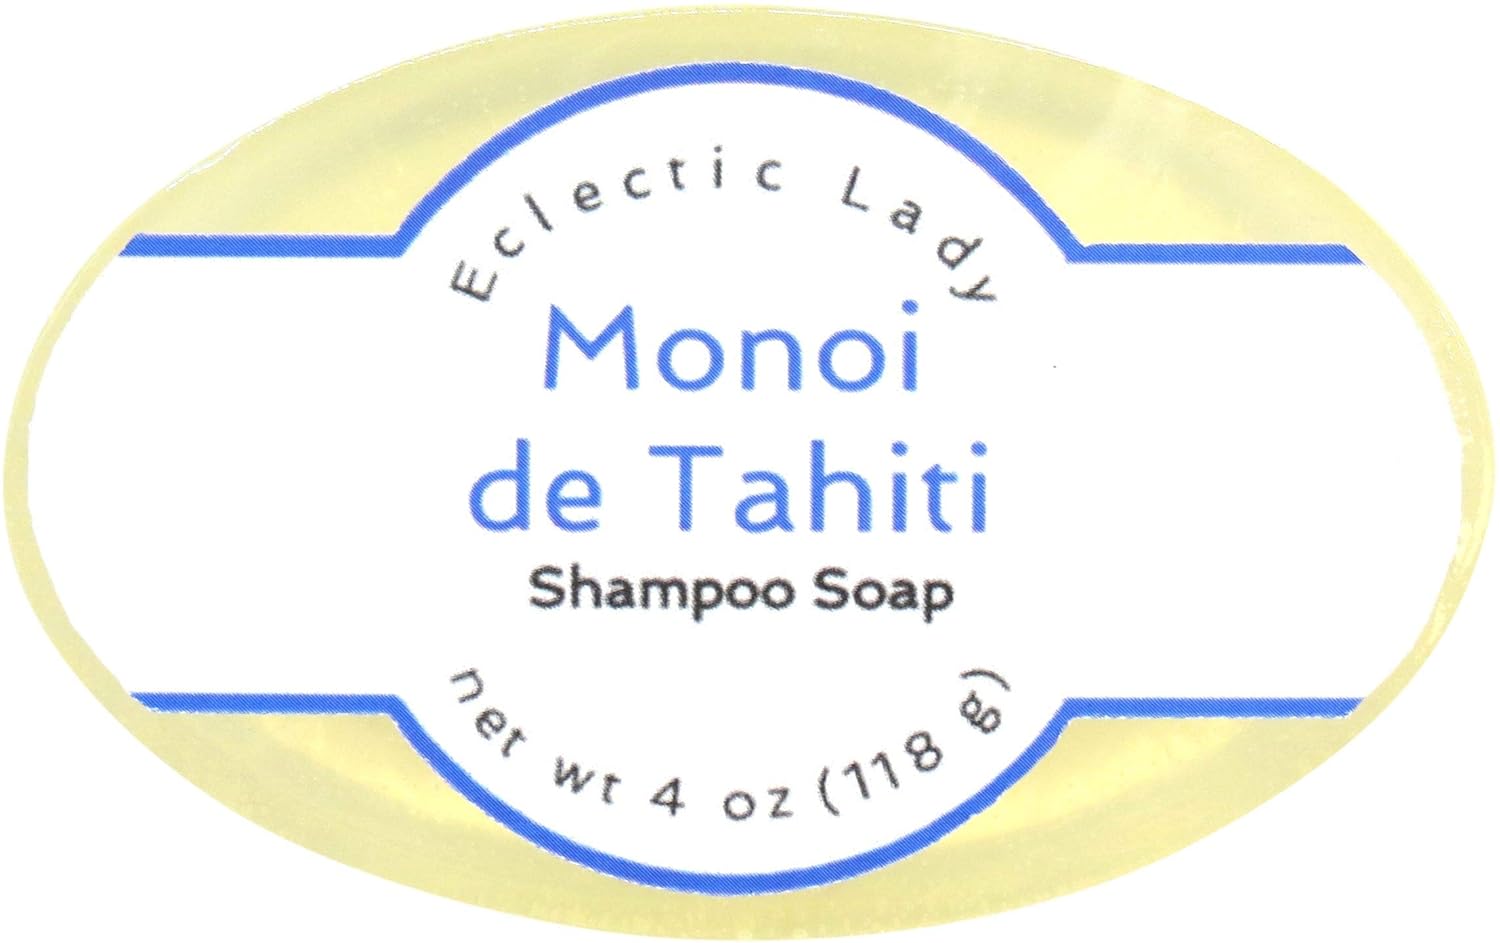 Eclectic Lady Monoi de Tahiti Shampoo Soap Bar with Pure Argan Oil, Silk Protein, Honey Protein and Extracts of Calendula ower, Aloe, Carrageenan, Sunower - 4  Bar